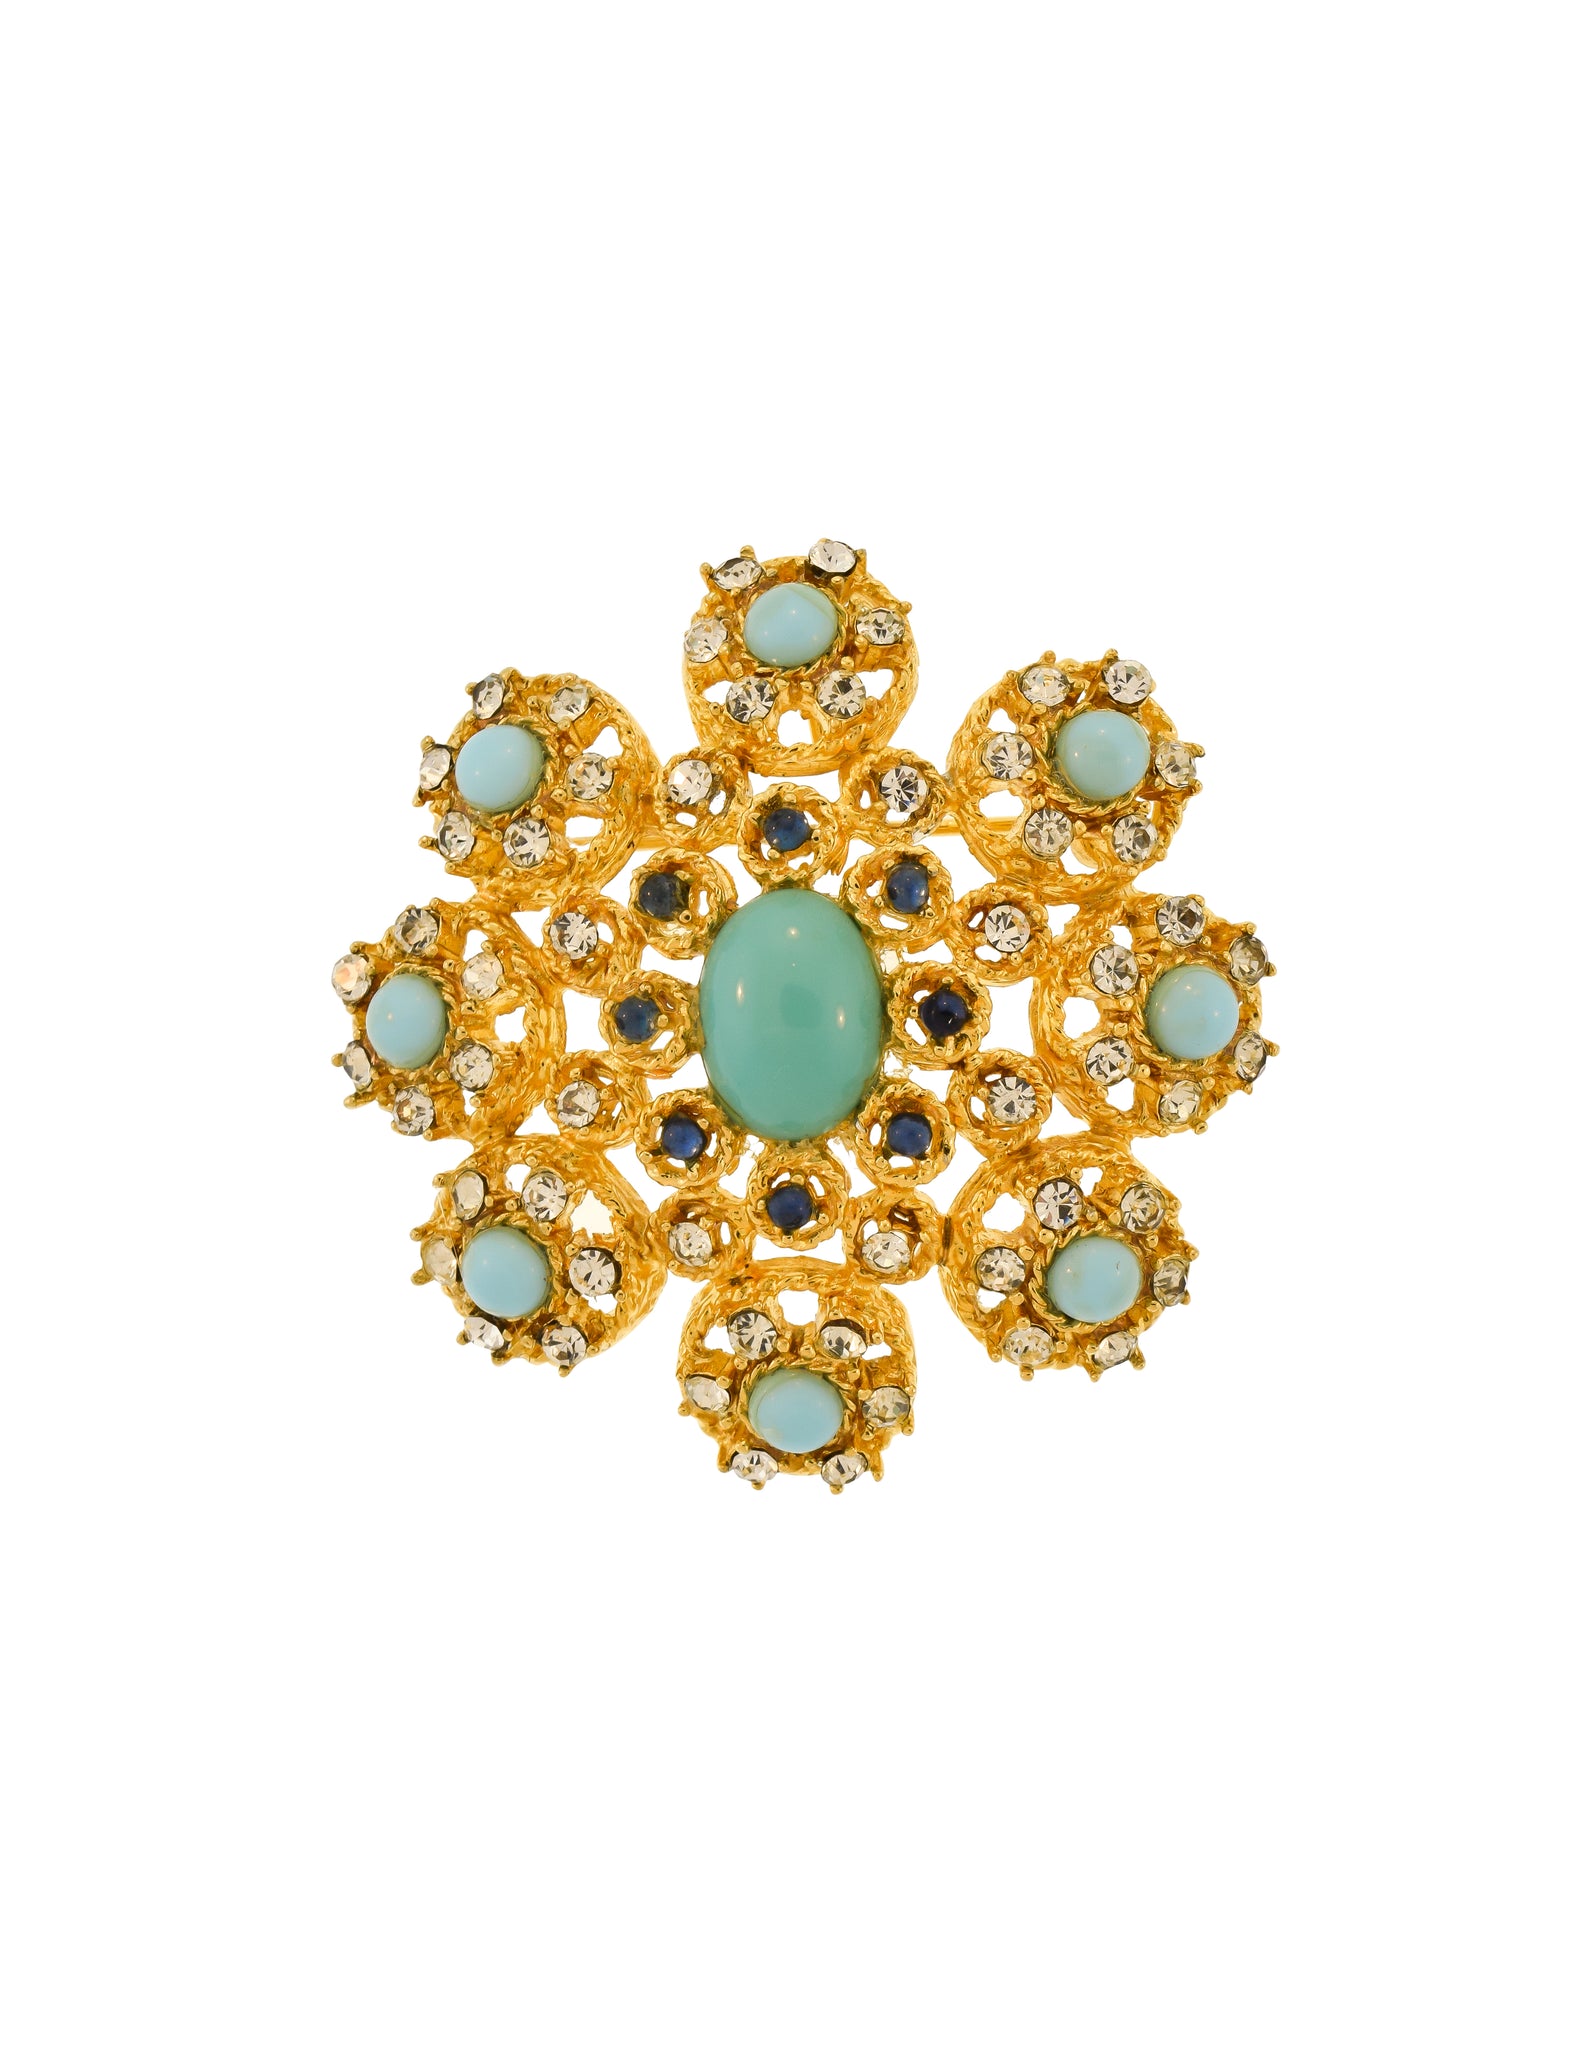 Givenchy Vintage 1960s Turquoise Blue Rhinestone Gold Pendant Brooch Pin